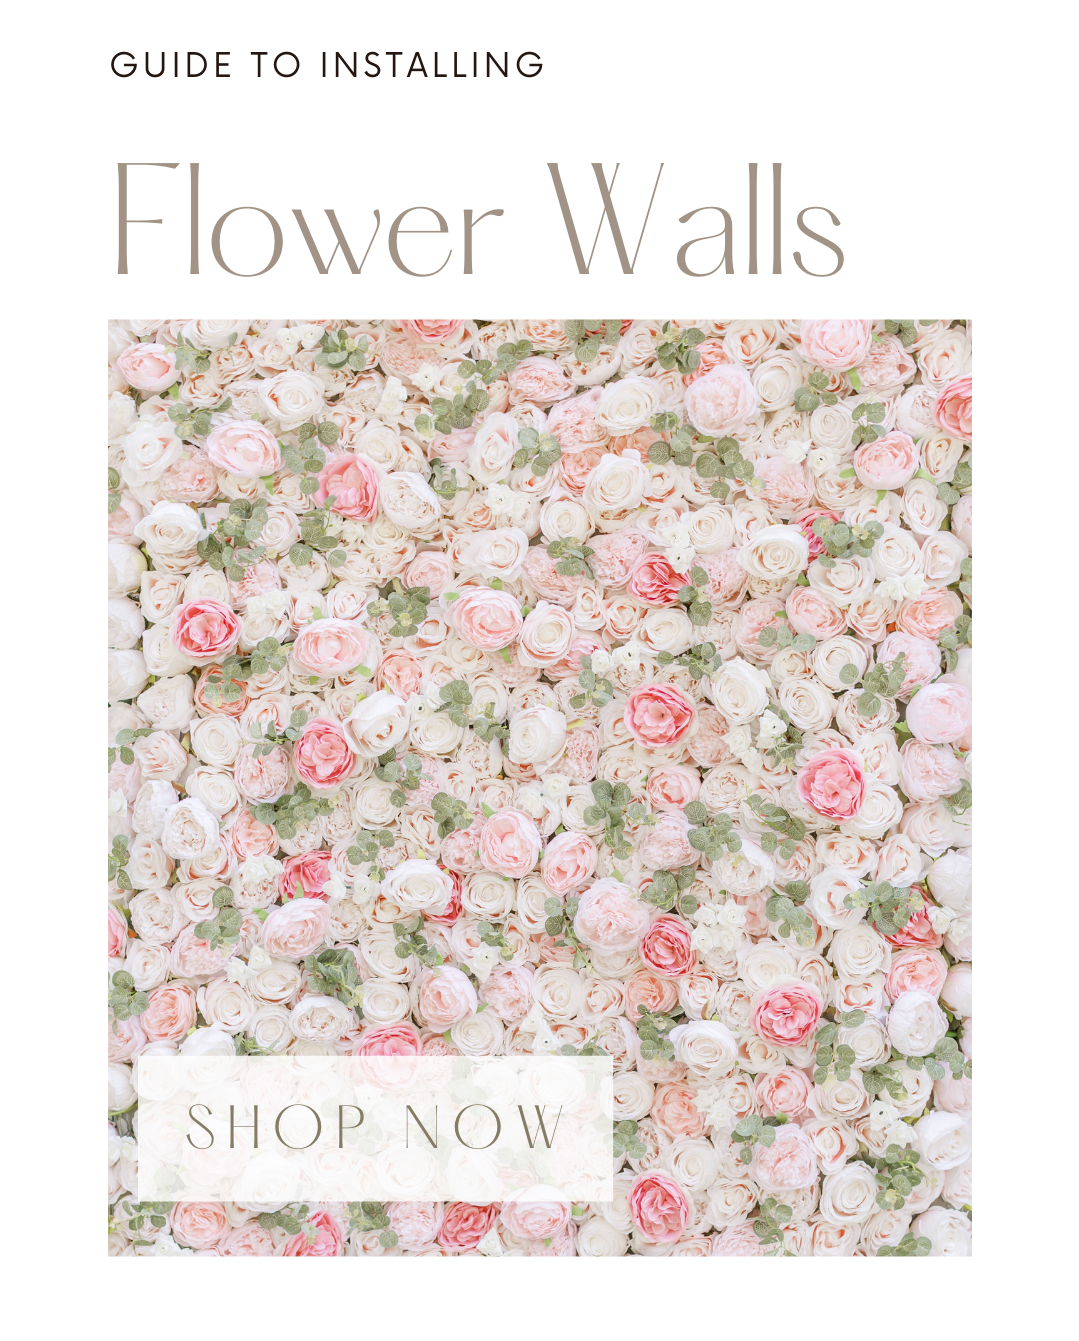 See How Easy It Is To Put Up a Beautiful Rental Flower Wall